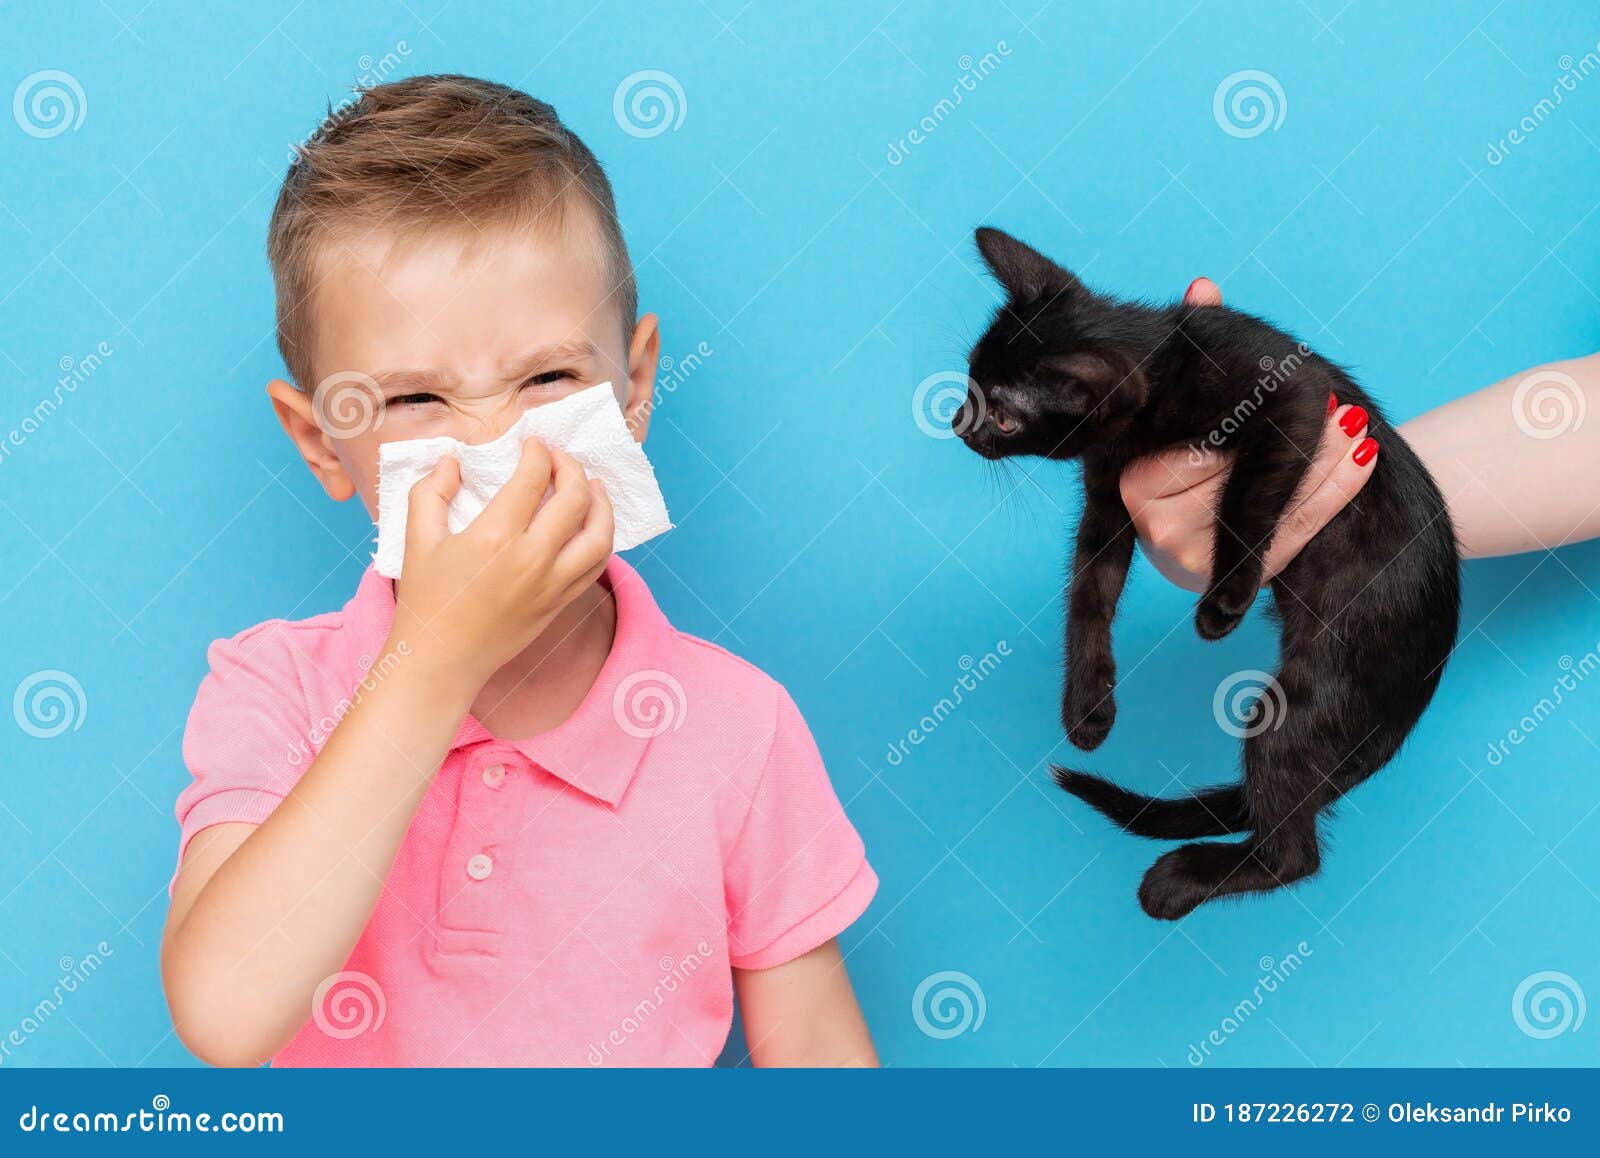 Caucasian Boy With Allergies Blowing Nose Into Tissue And Stands By The Kitten Stock Photo Image Of Disease Blowing 187226272